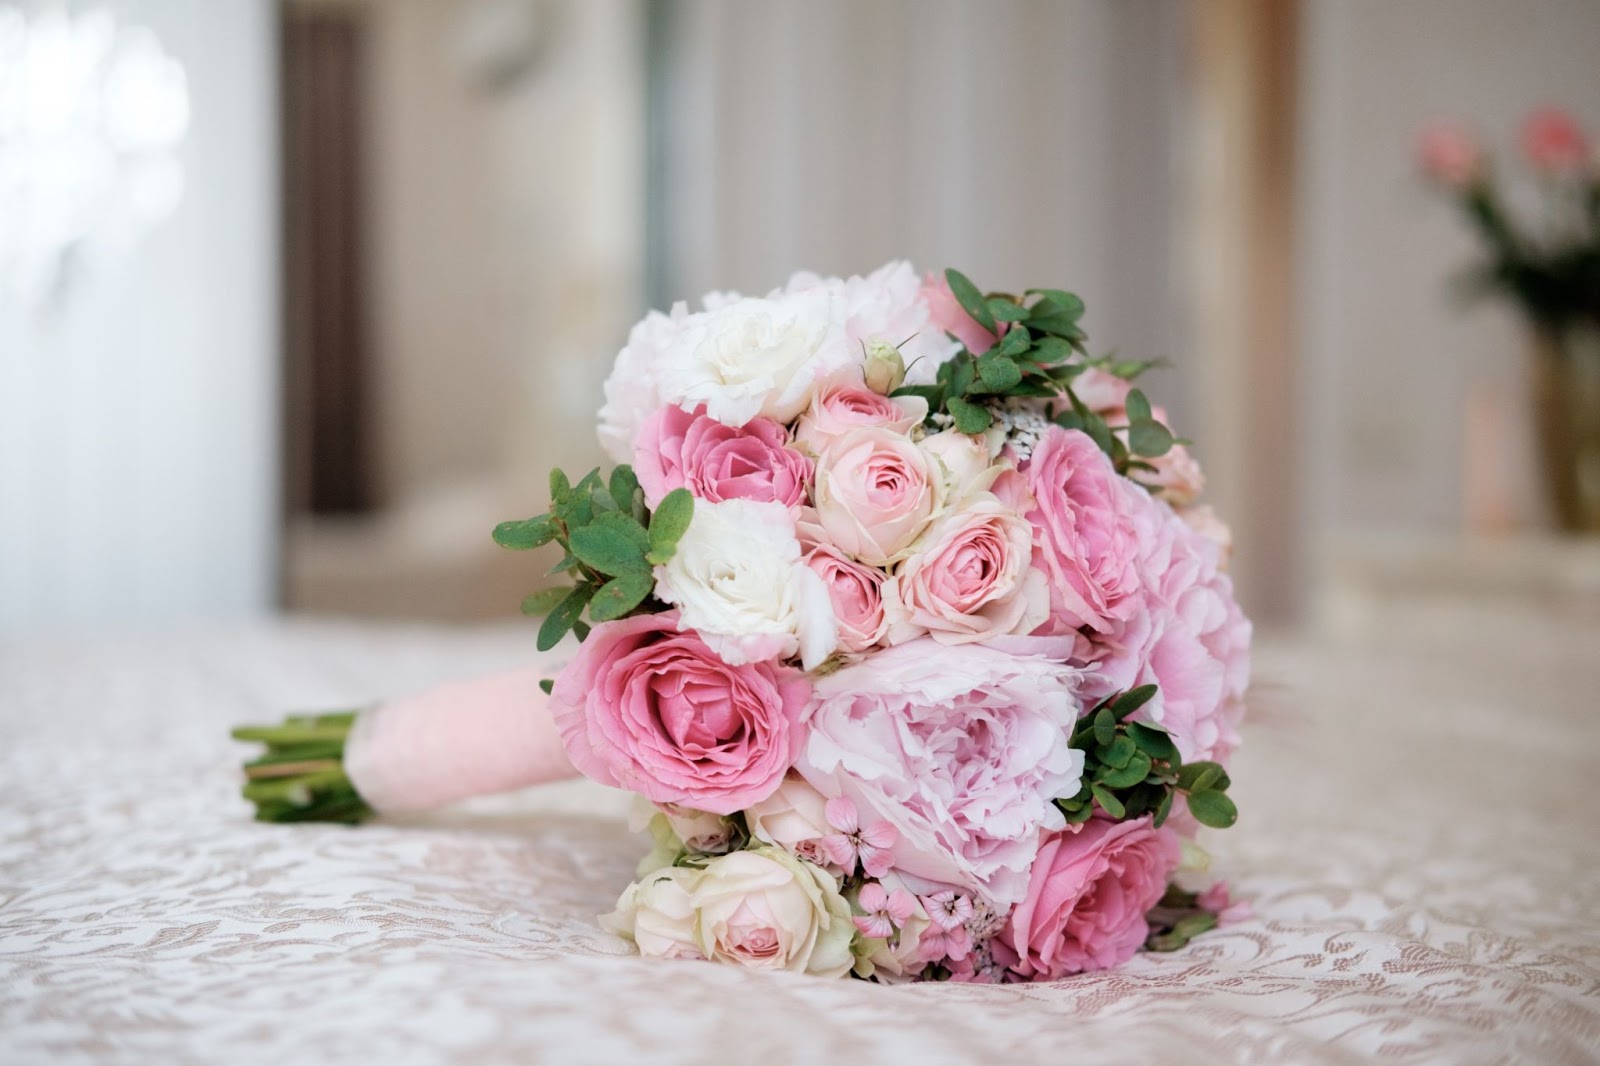 Barbiecore Wedding Trends: The Most Popular Pink Details According to TikTok   